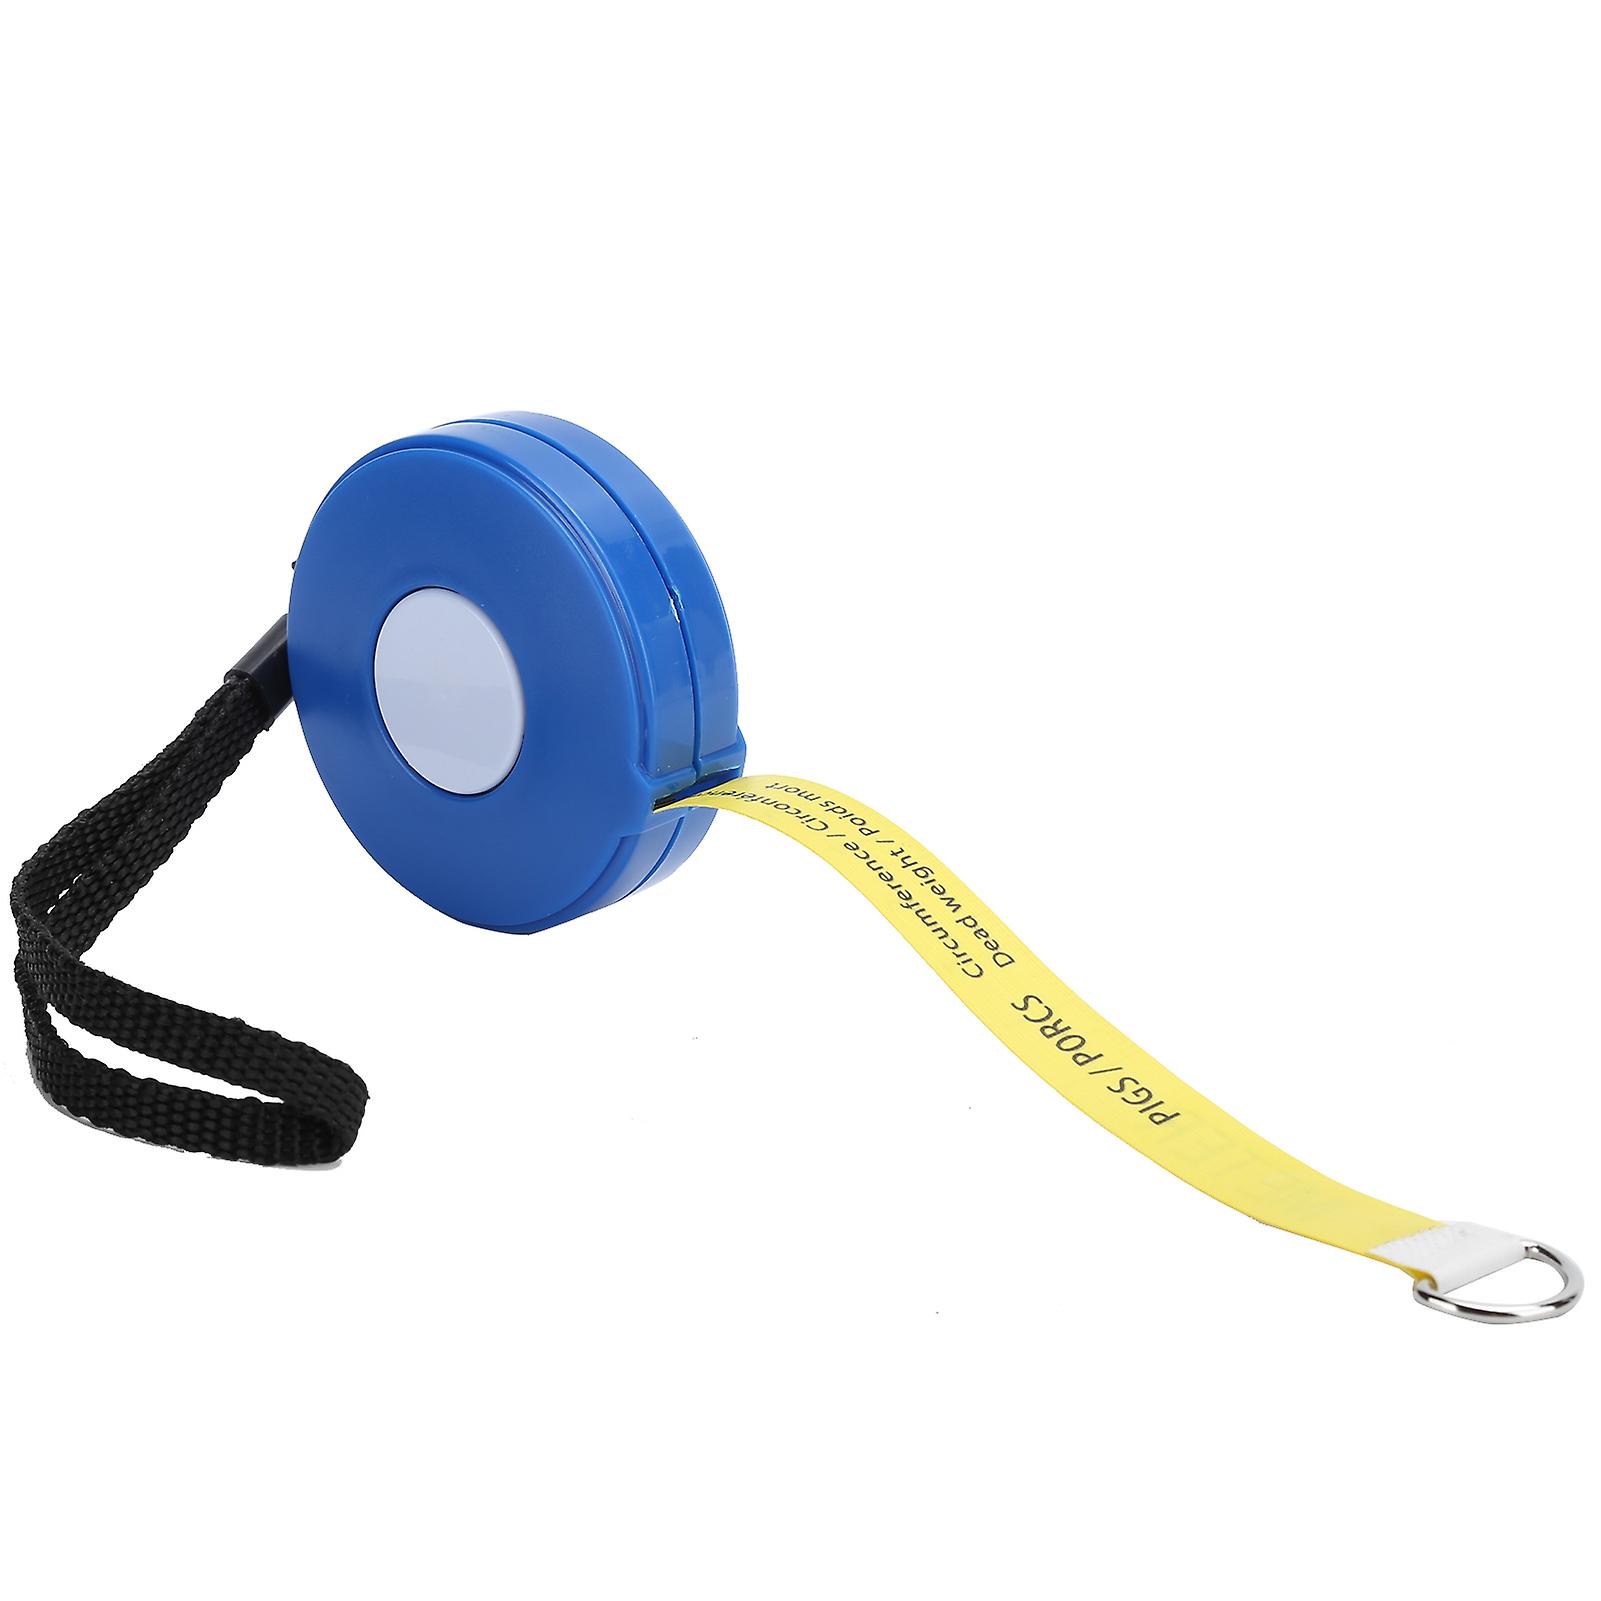 2.5m Body Weight Tape Measure Retractable Measuring Tape Farm Equipment For Pig Cattle